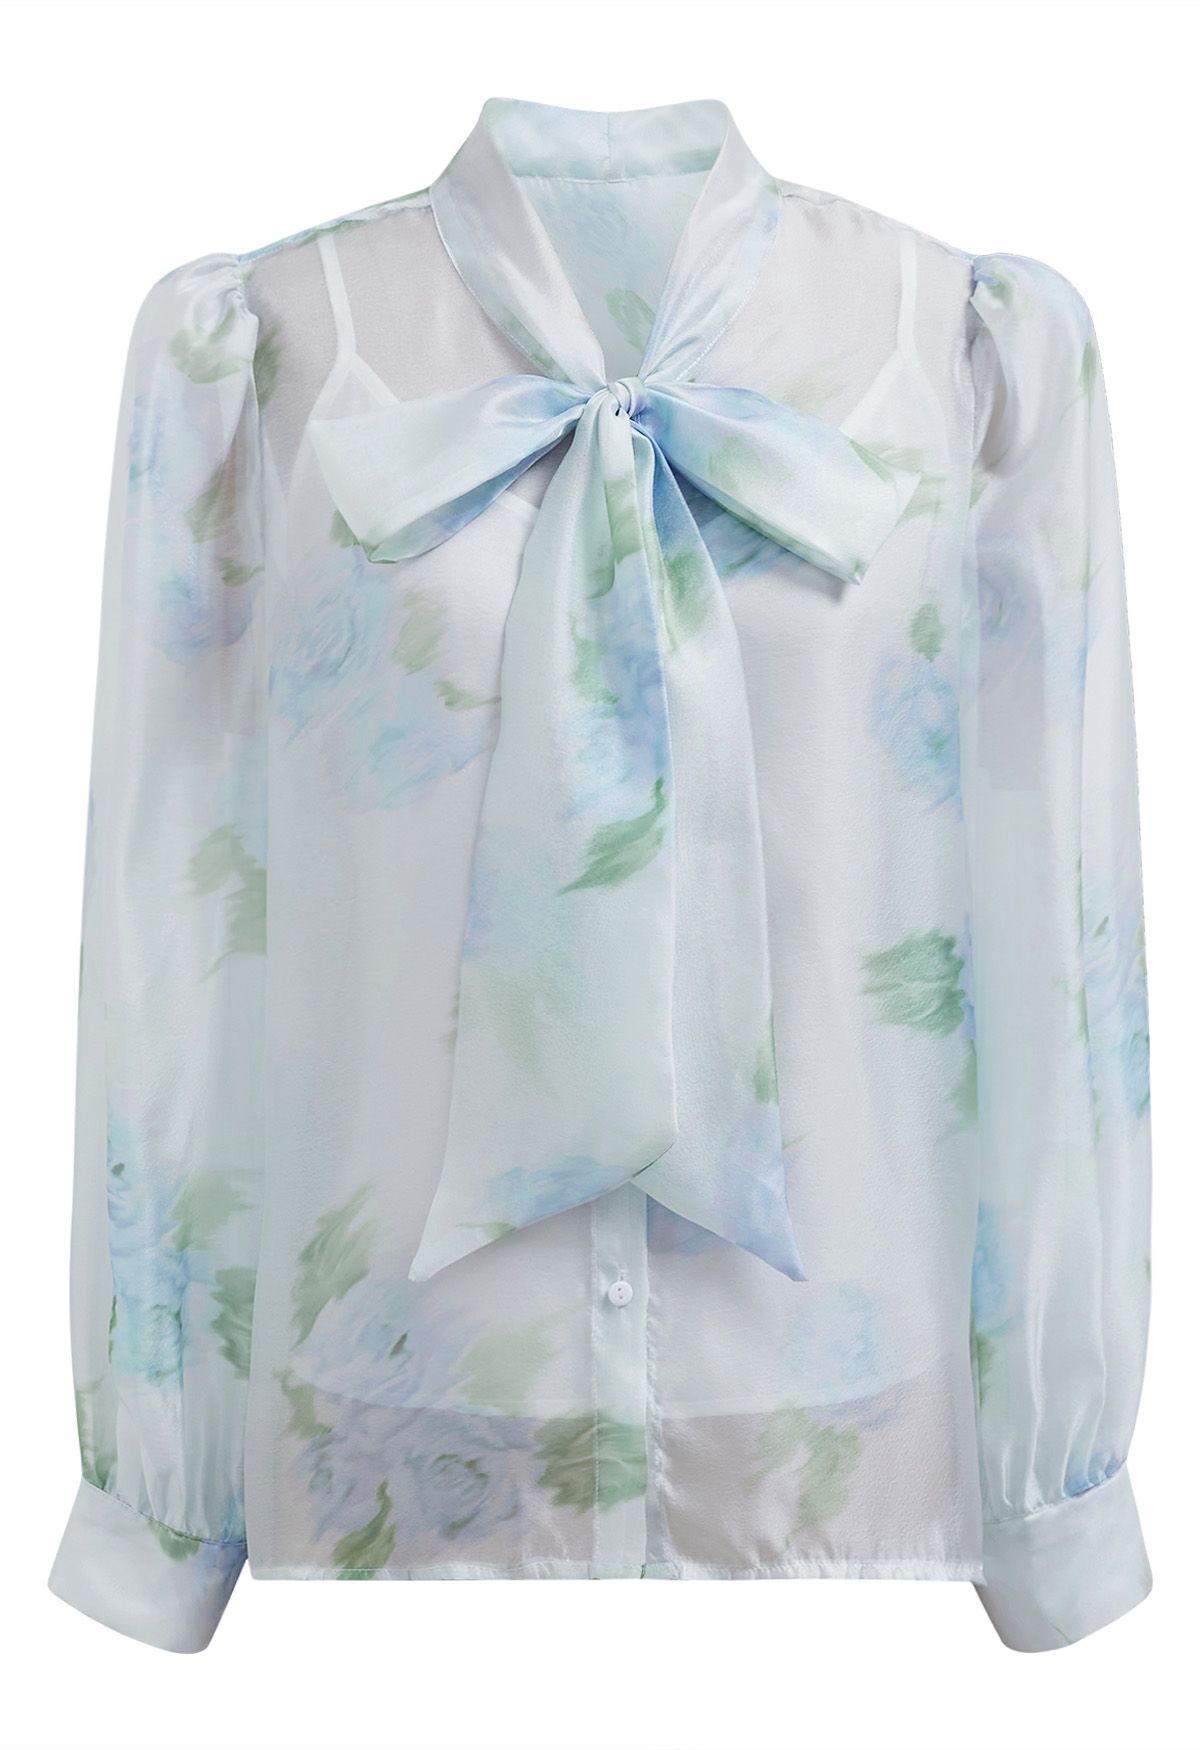 Enthralling Watercolor Floral Bowknot Sheer Shirt in Blue